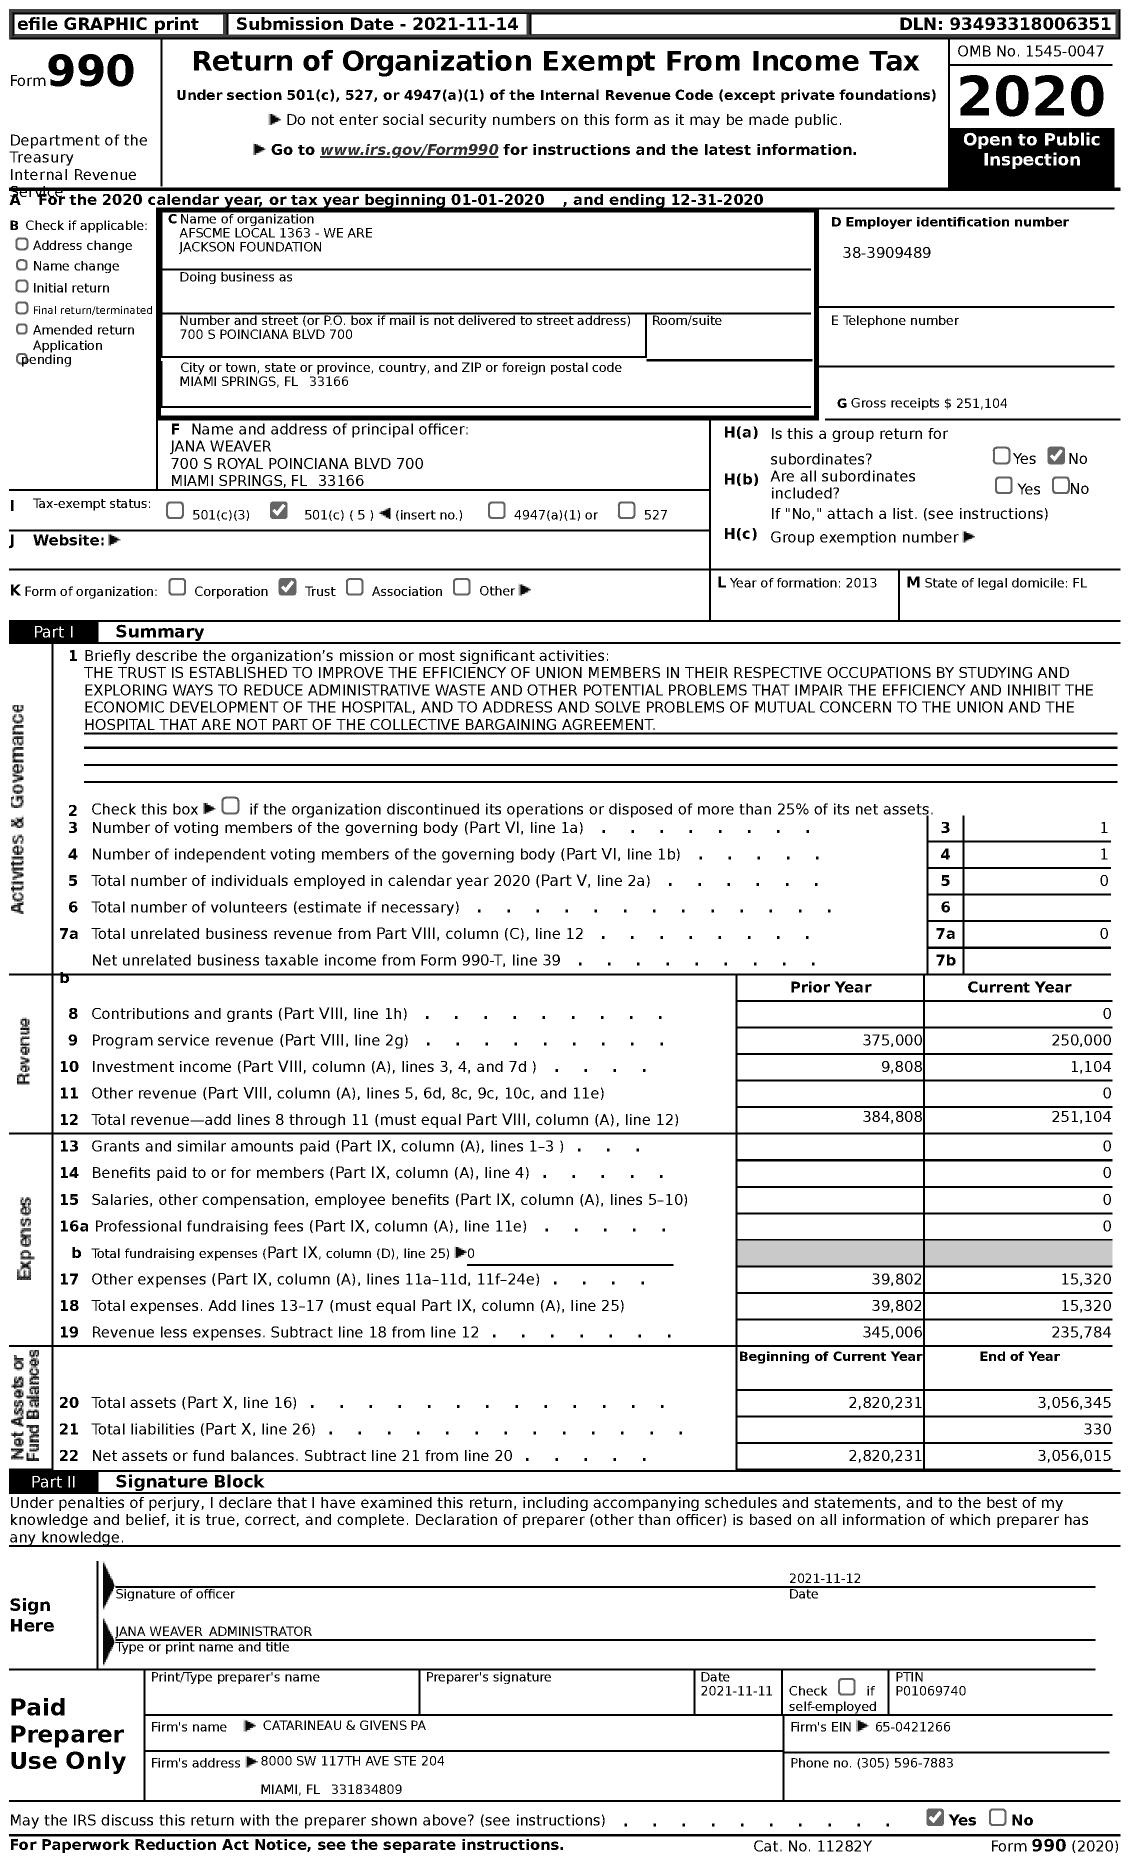 Image of first page of 2020 Form 990 for AFSCME Local 1363 - We Are Jackson Foundation